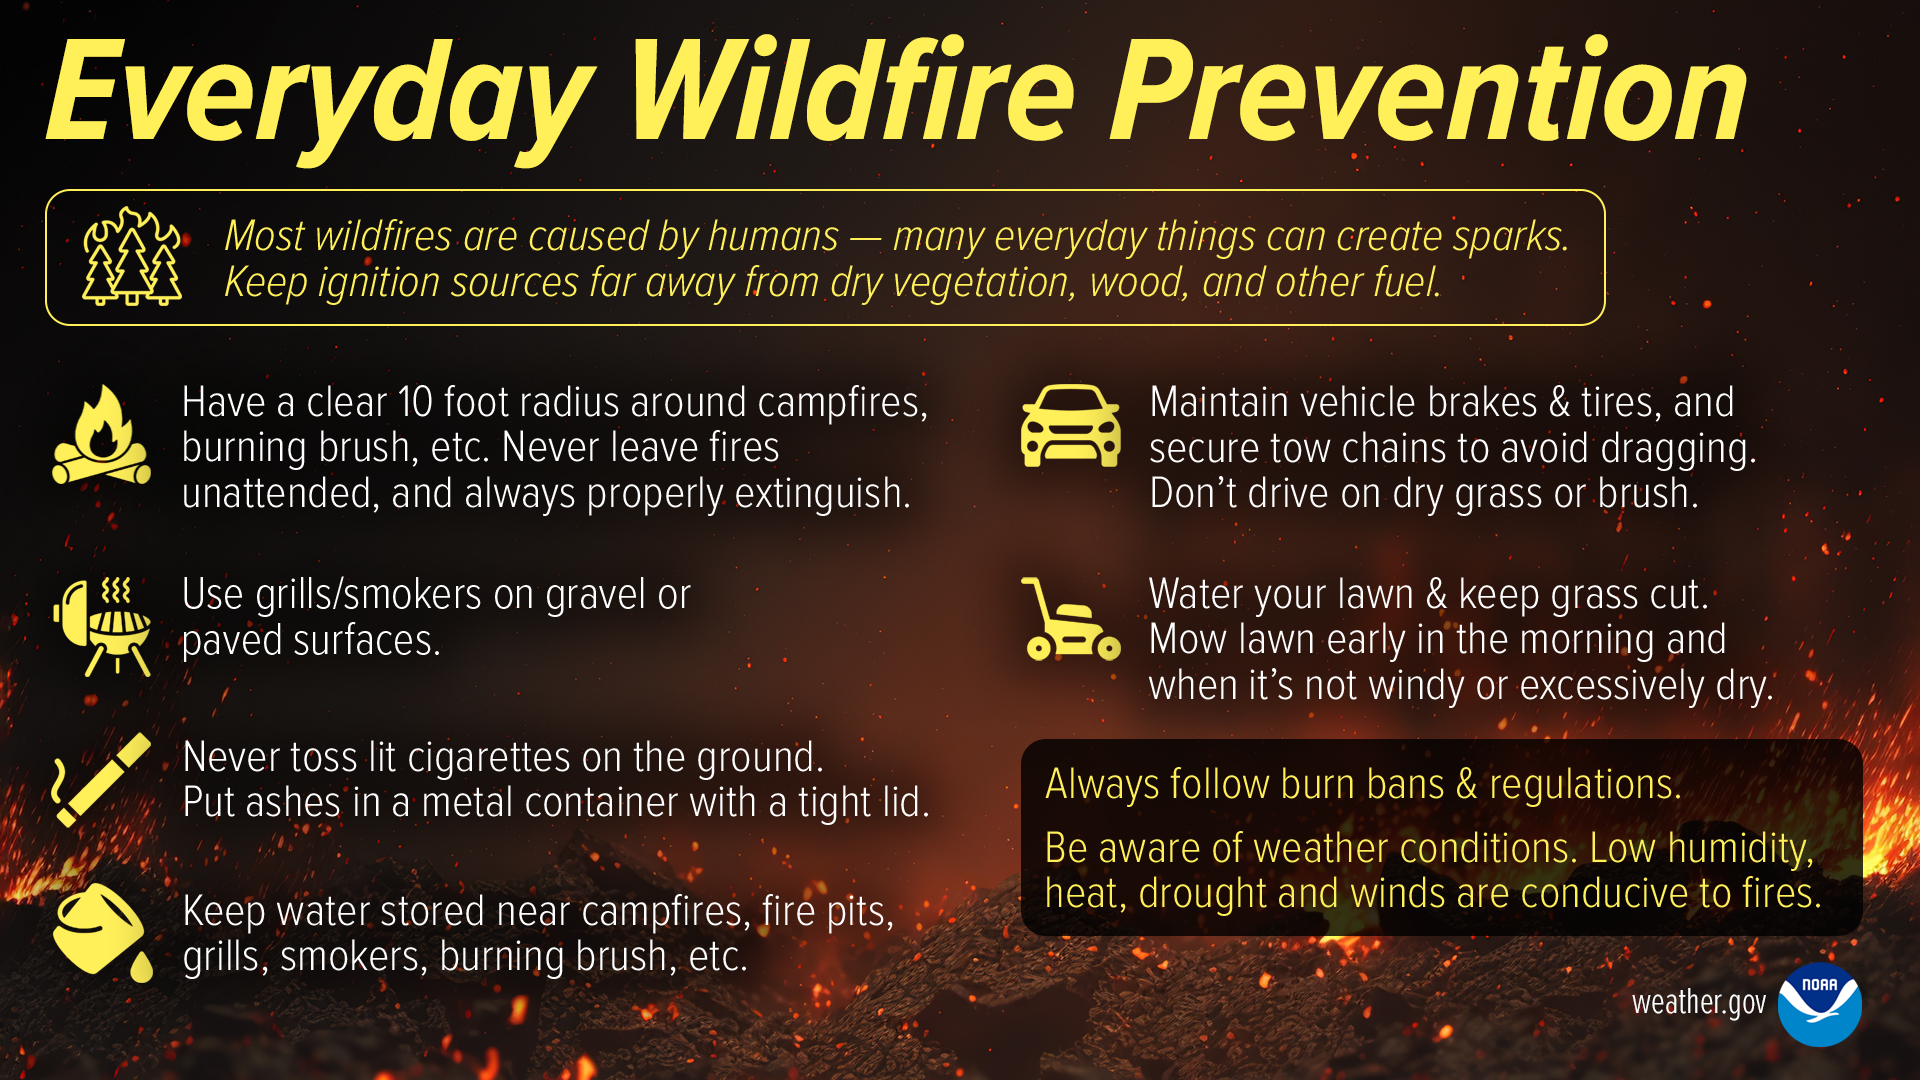 NWS Goodland Safety Graphics for Partner Use